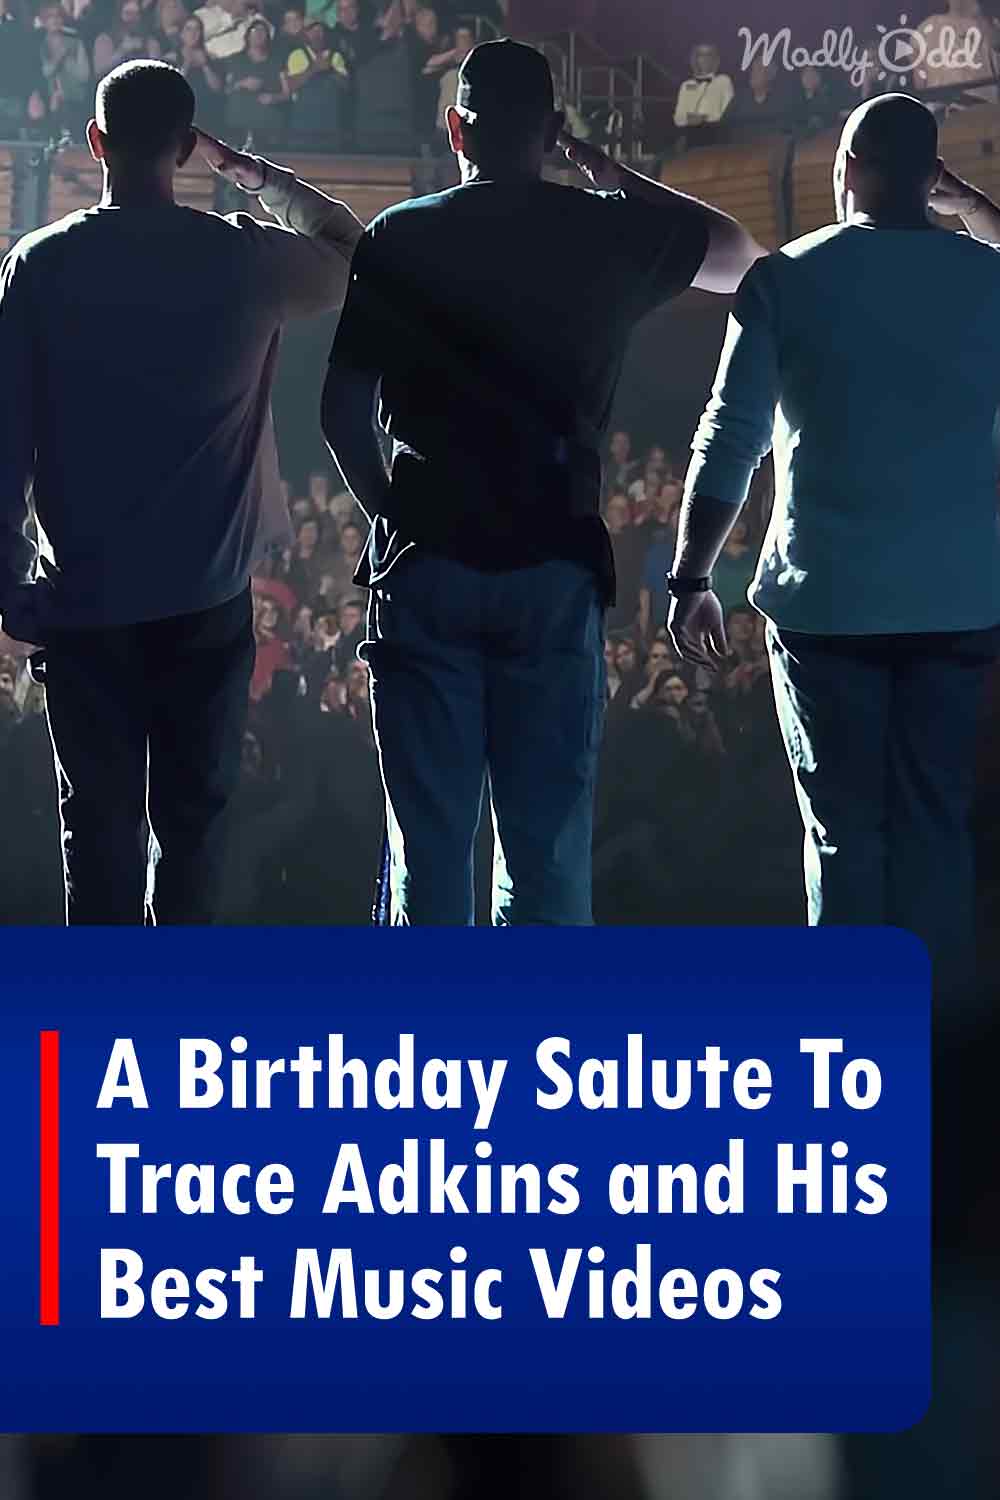 A Birthday Salute To Trace Adkins and His Best Music Videos